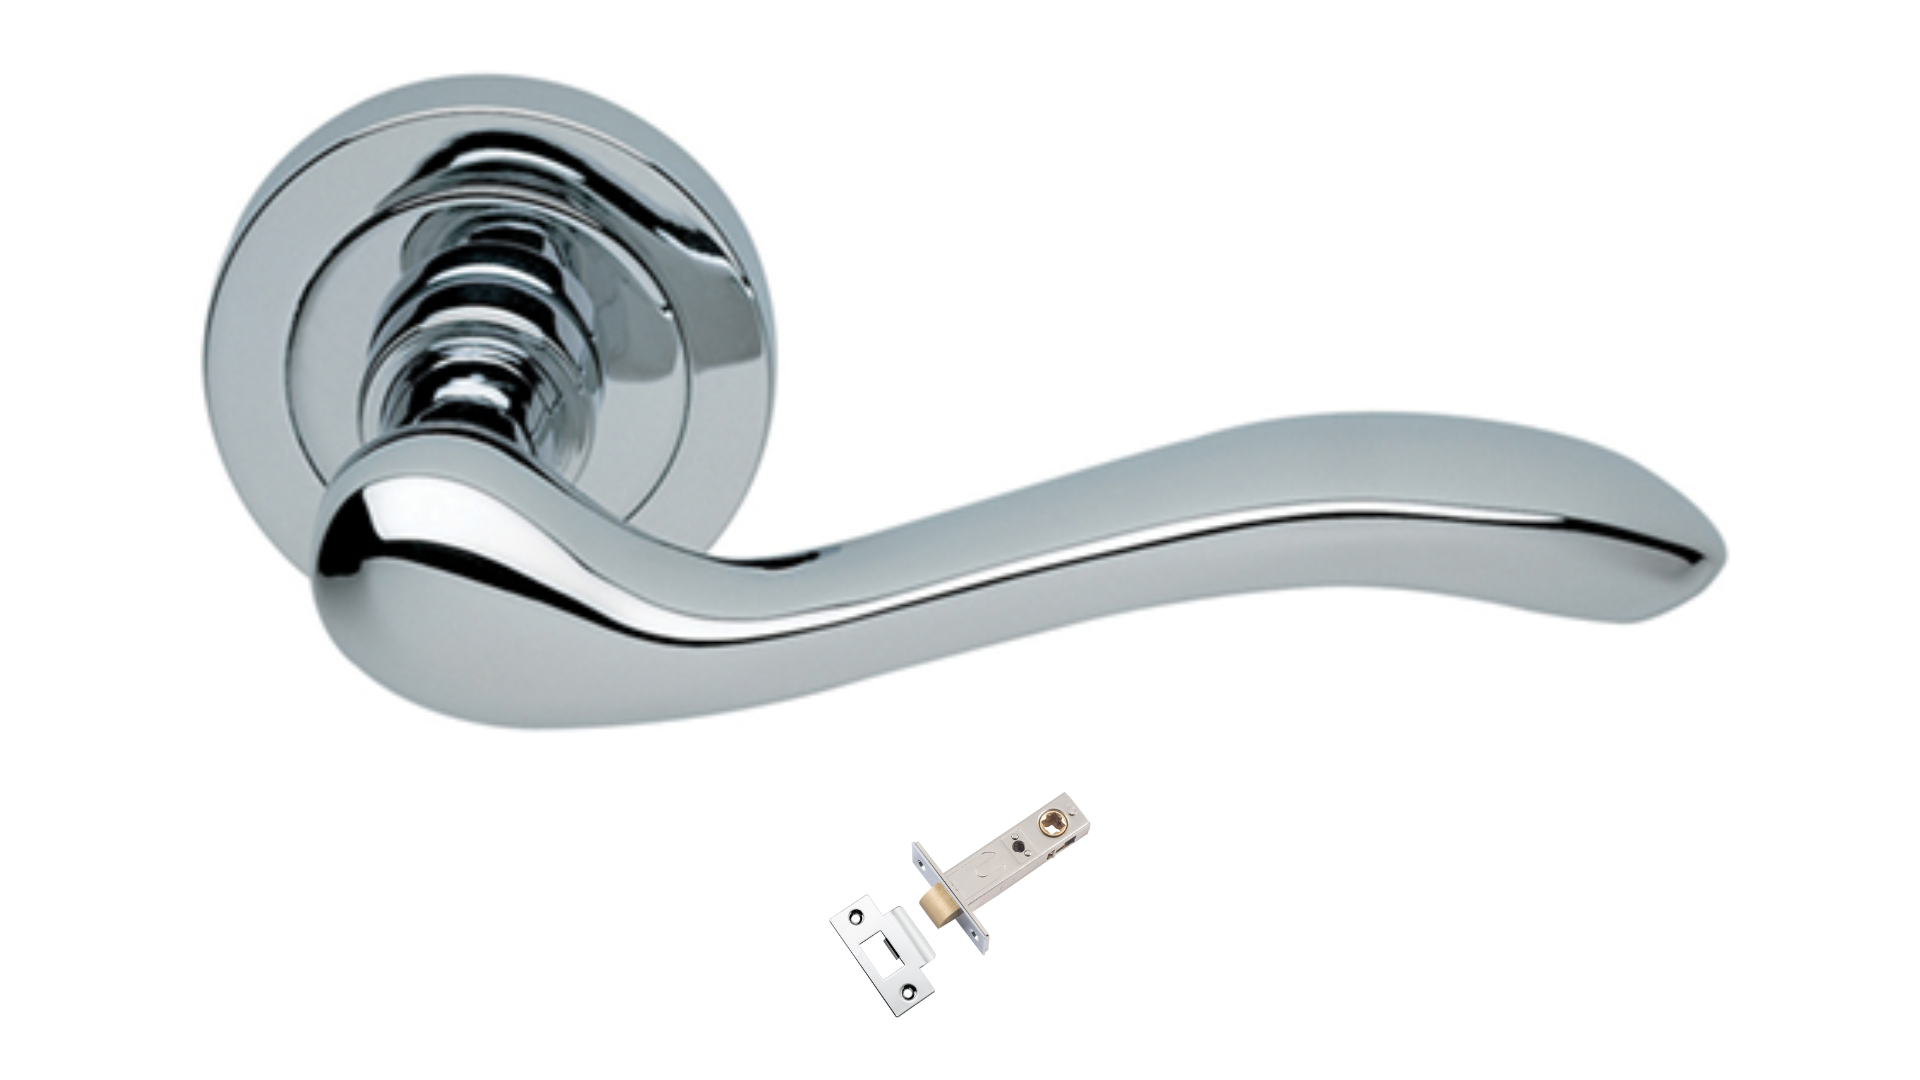 The Erica door handle in polished chrome with a privacy latch underneath on a white background.